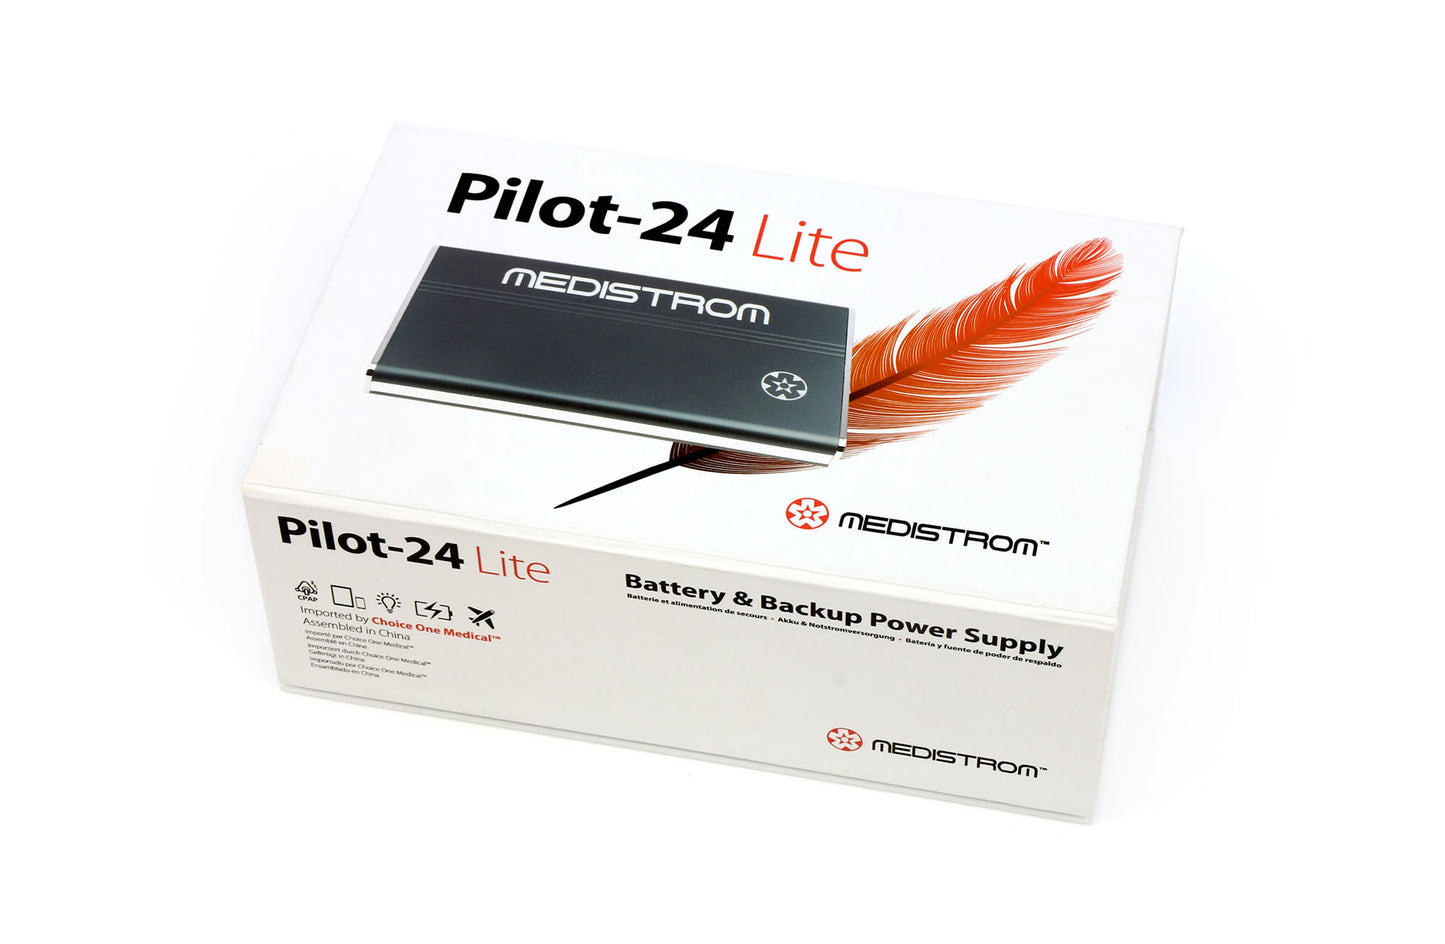 Packaging for Pilot-24 Power Supply